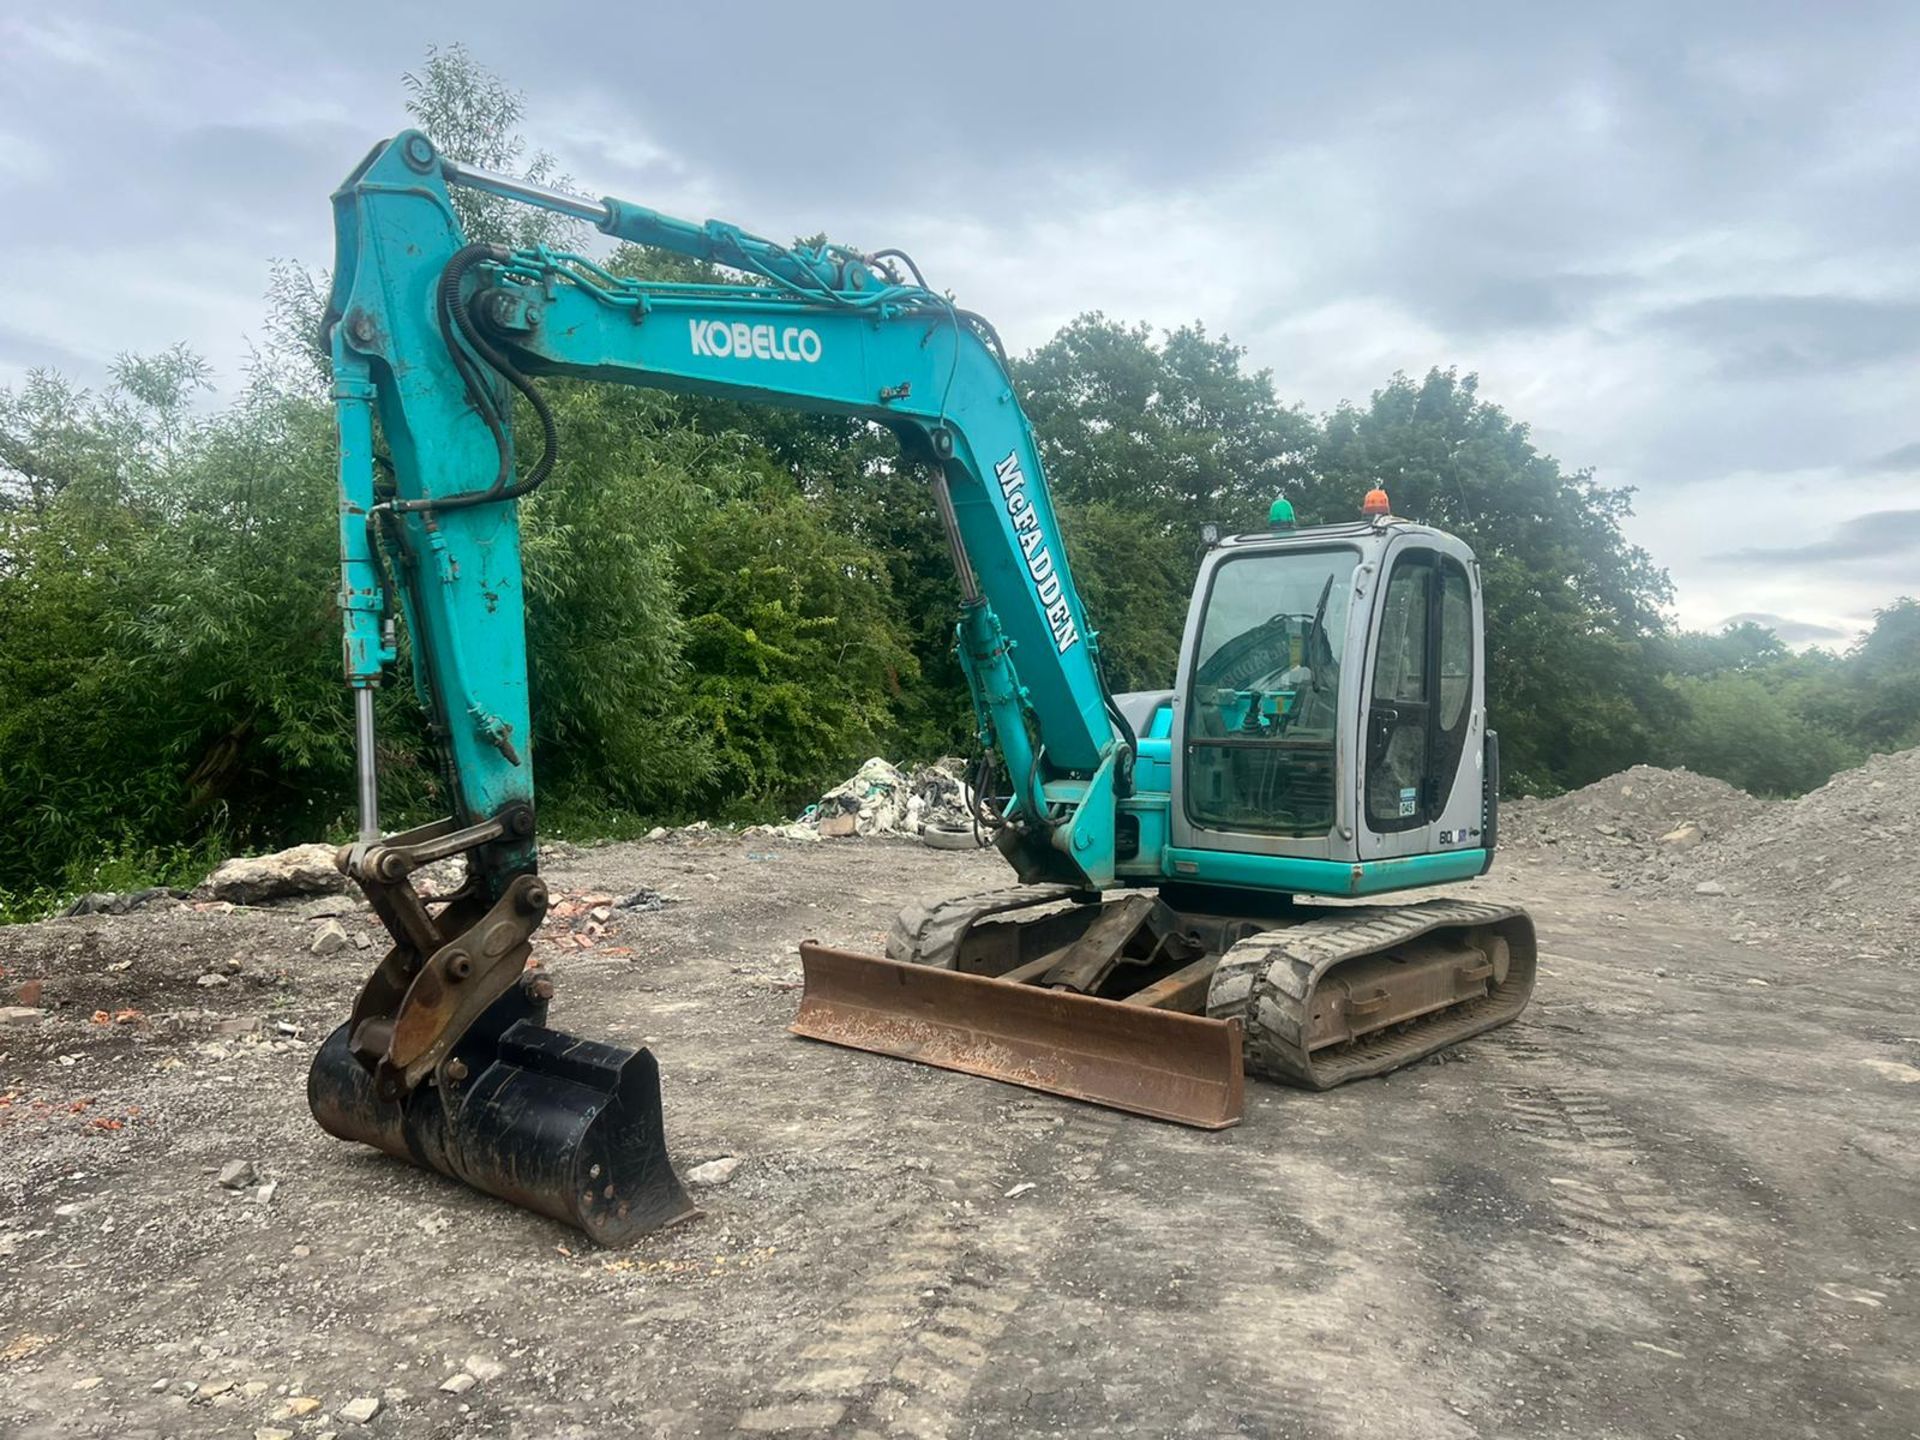 Kobelco 80MSR 8 Tonne Excavator With Blade, Runs Drives And Digs,Showing A Low 9117 Hours!*PLUS VAT*